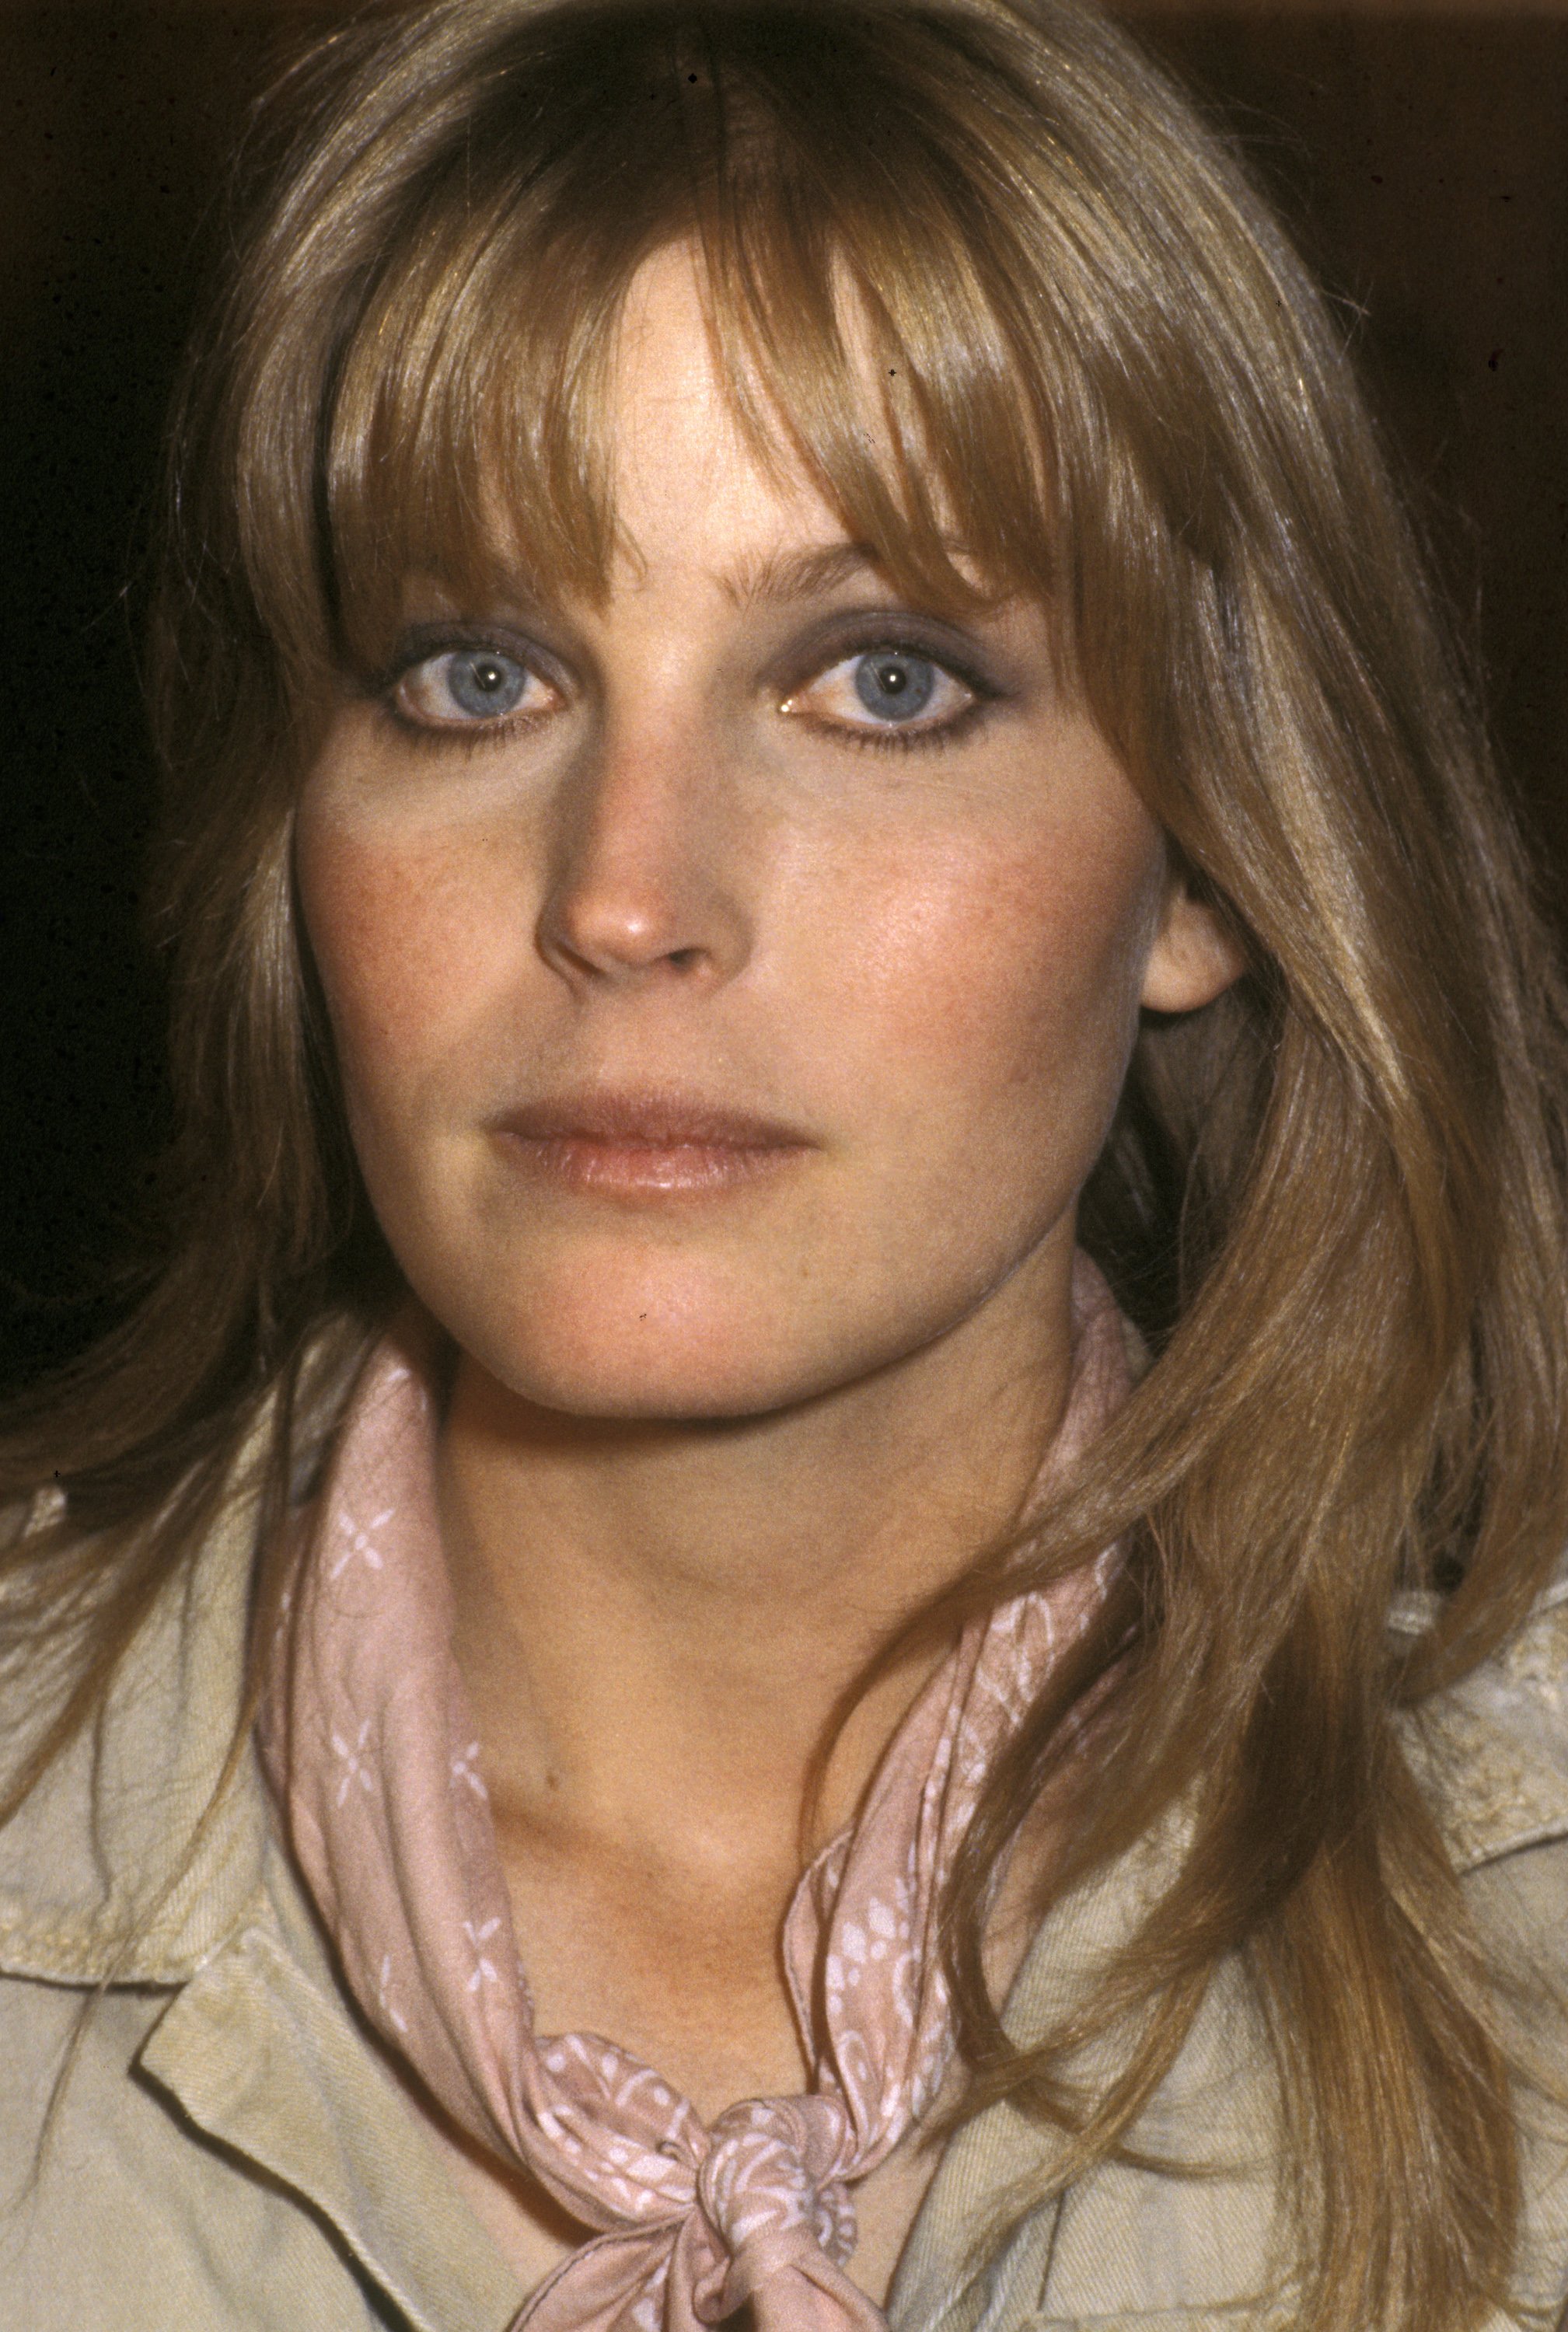 Model Bo Derek attends a press conference for "A Change of Season" on February 7, 1980 | Source: Getty Images